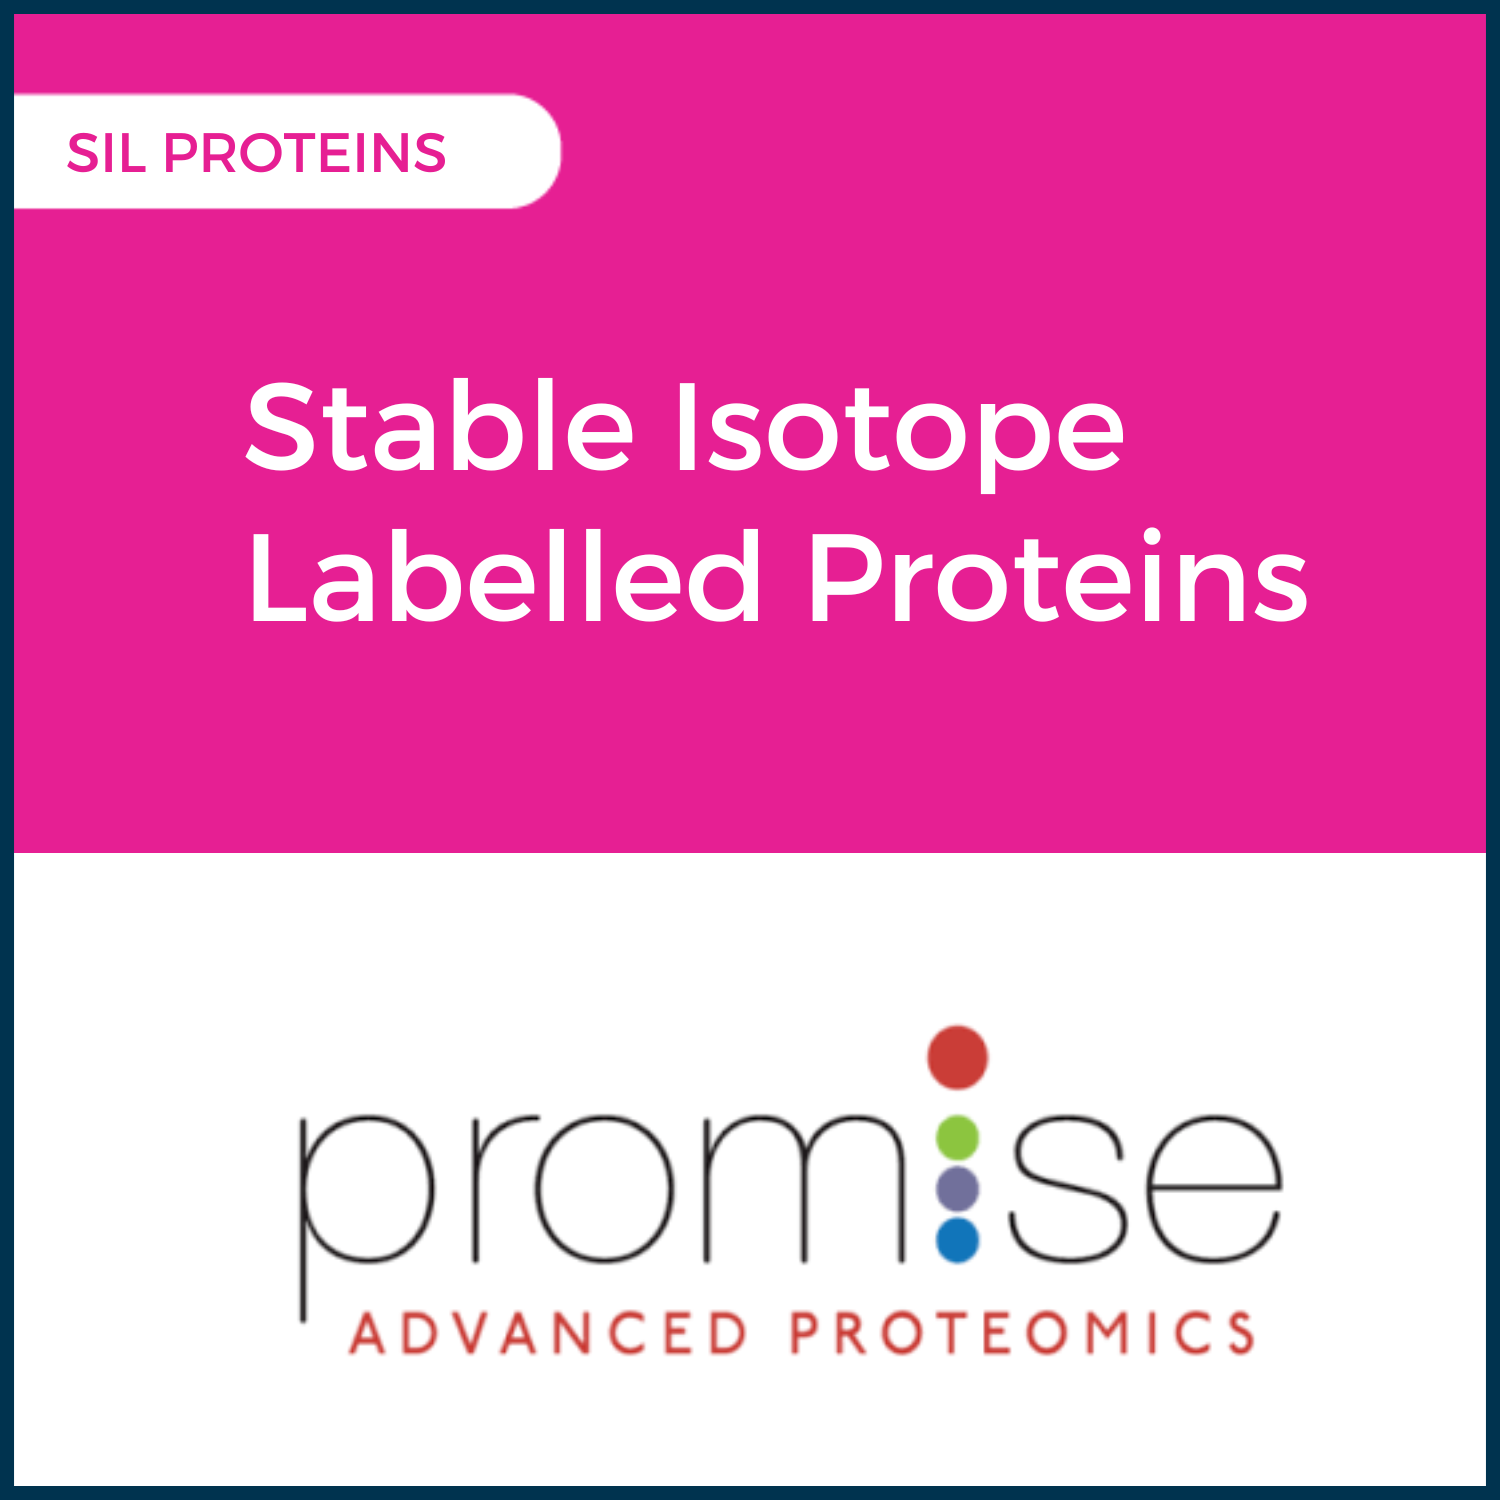 Stable Isotope Labelled SIL Proteins